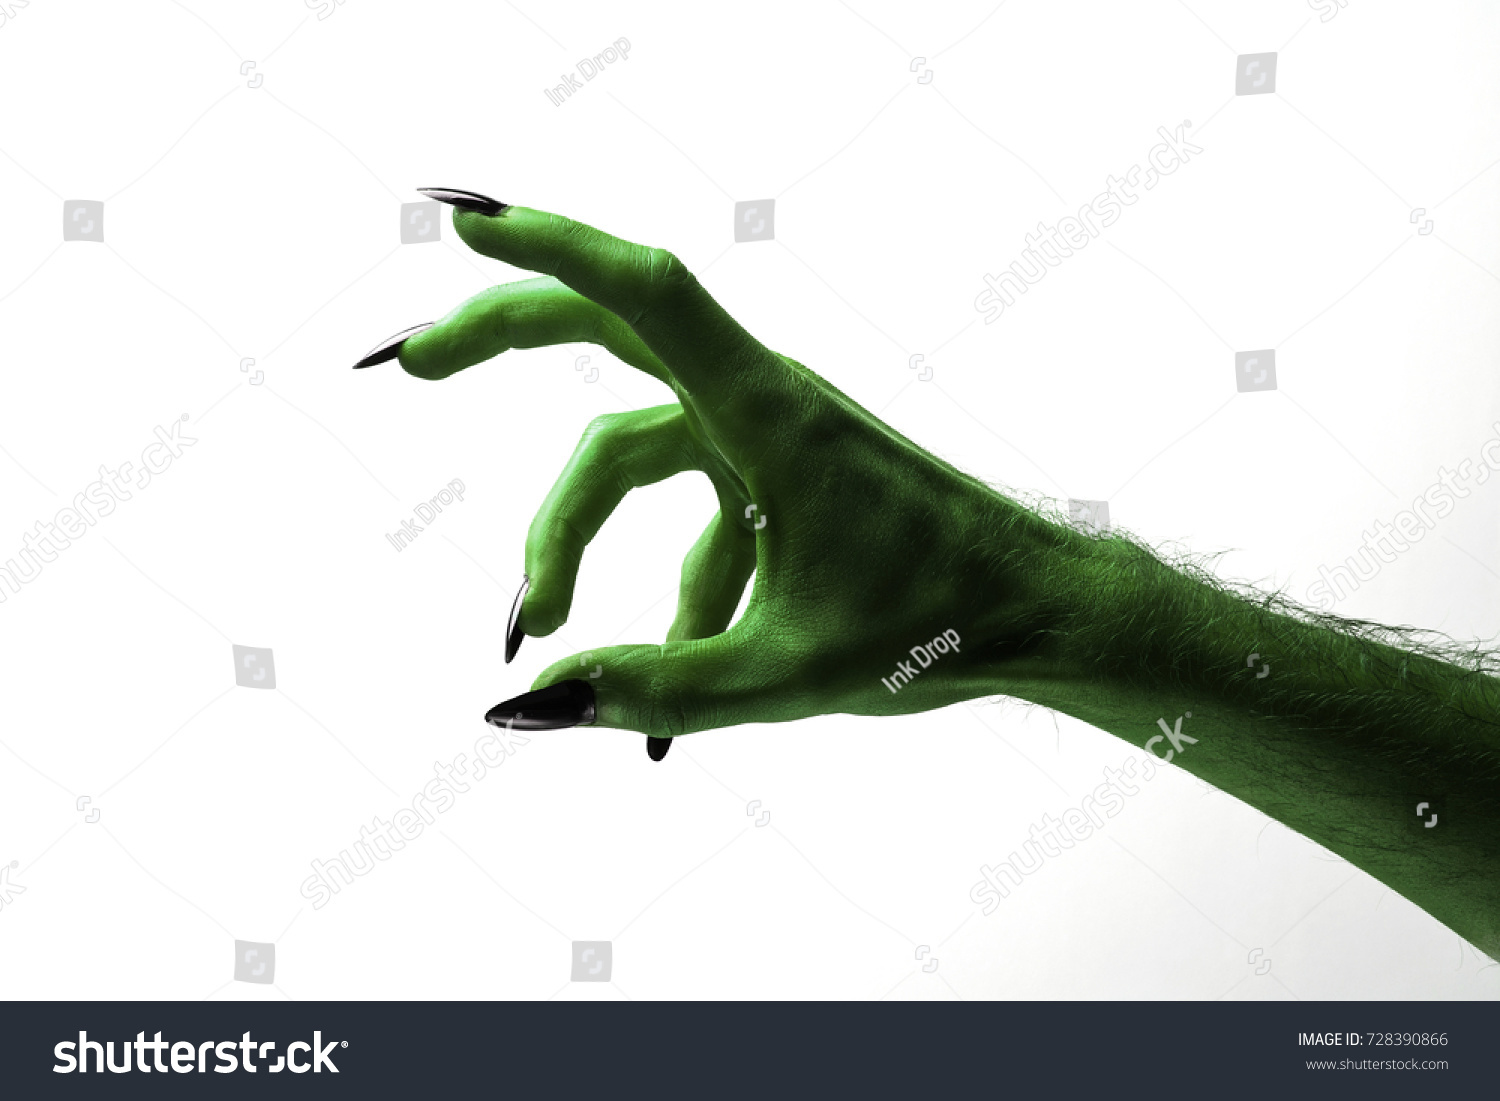 Halloween green witches or zombie monster hand #728390866